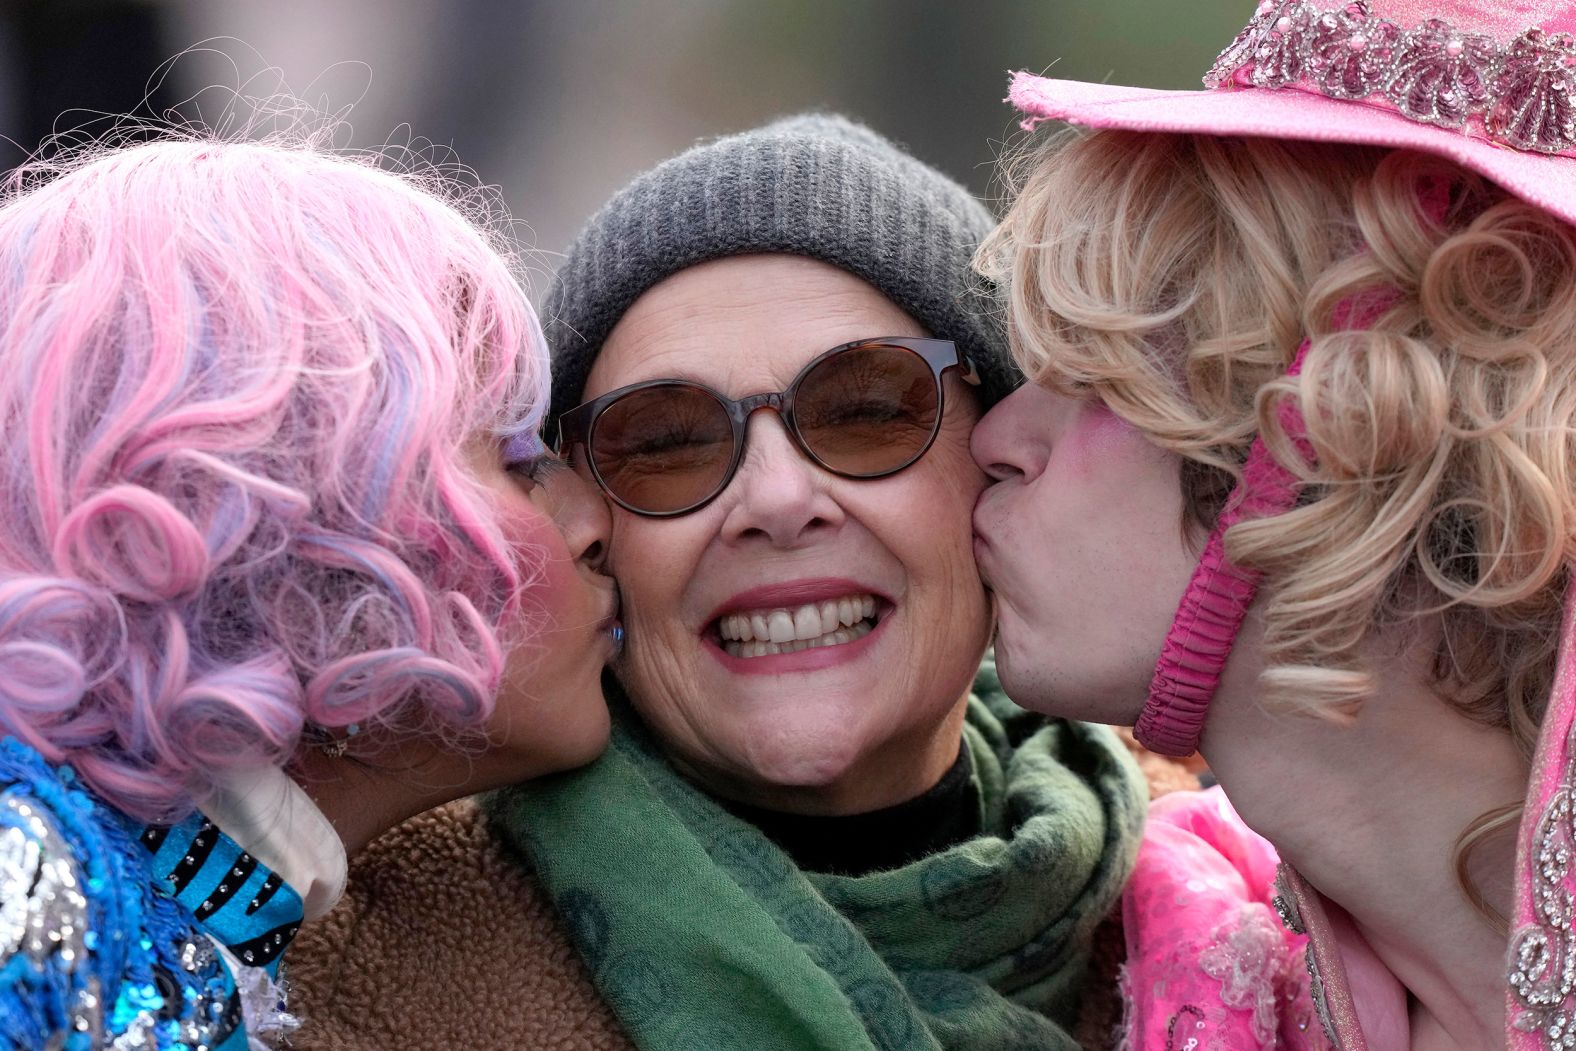 Actress Annette Bening receives a kiss from Harvard University theatrical students Nikita Nair, left, and Joshua Hillers during a parade in Cambridge, Massachusetts, on Tuesday, February 6. Bening was named Hasty Pudding Woman of the Year by the university’s Hasty Pudding Theatricals troupe.